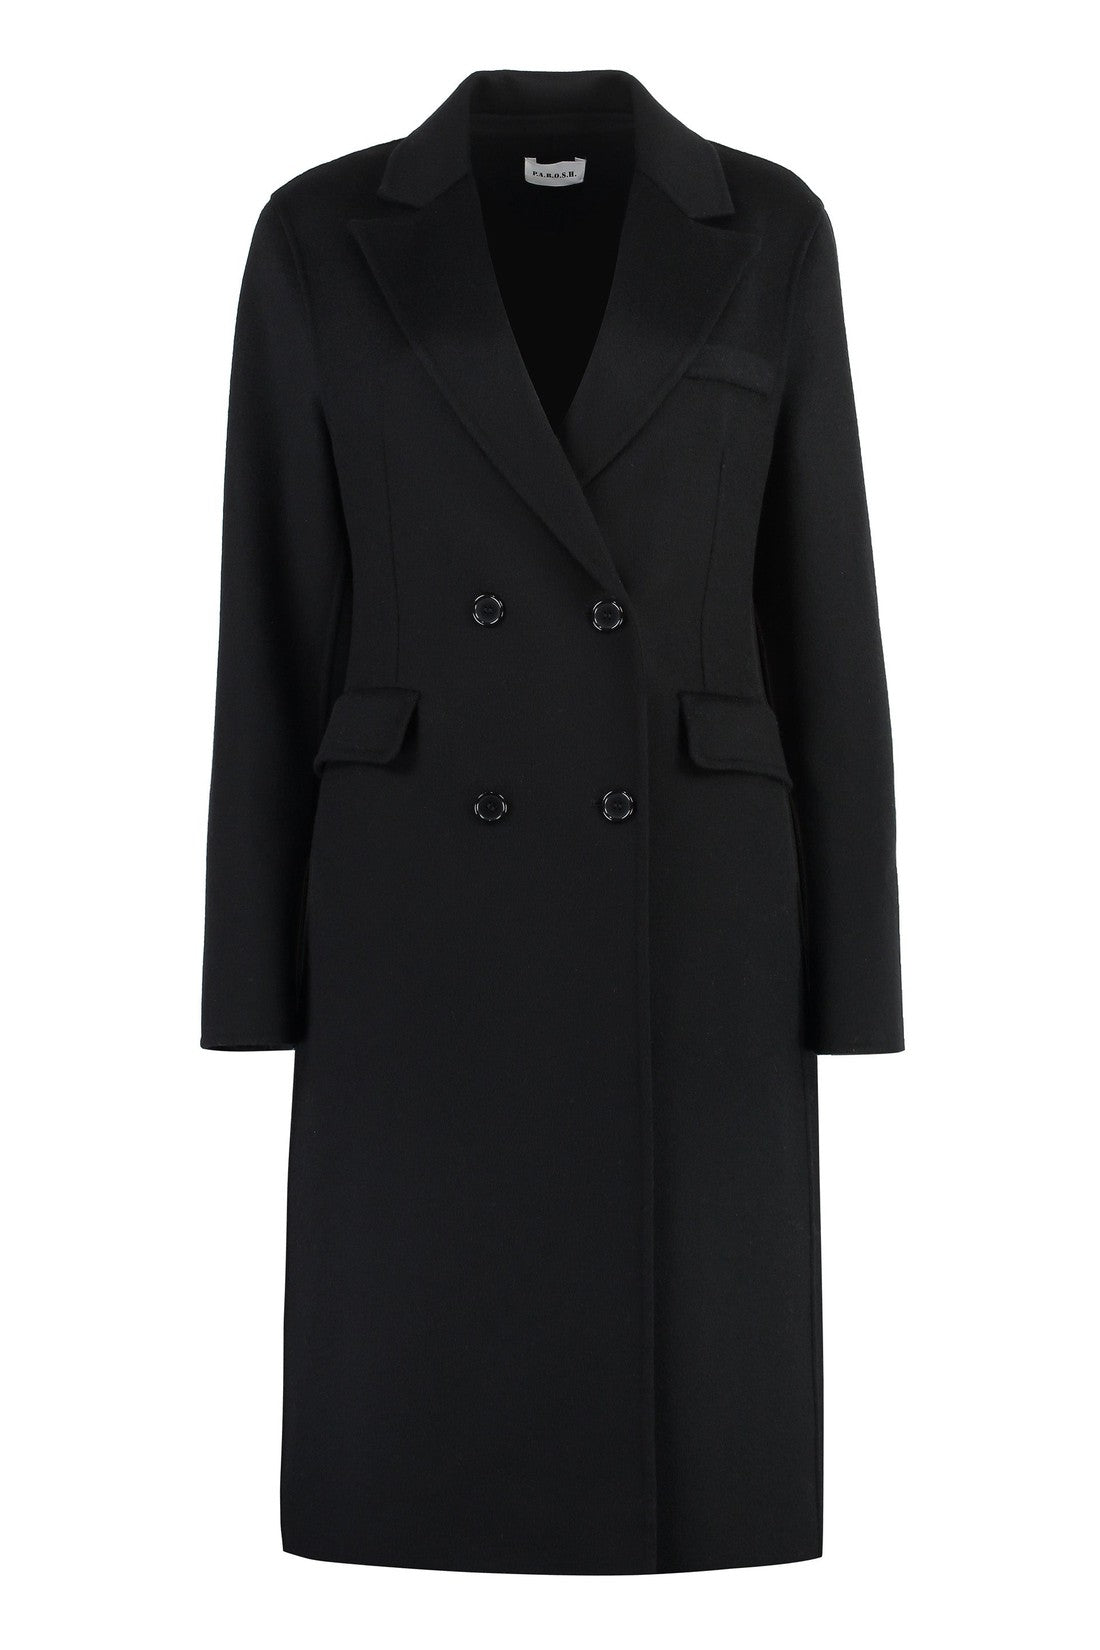 Parosh-OUTLET-SALE-Double-breasted wool coat-ARCHIVIST